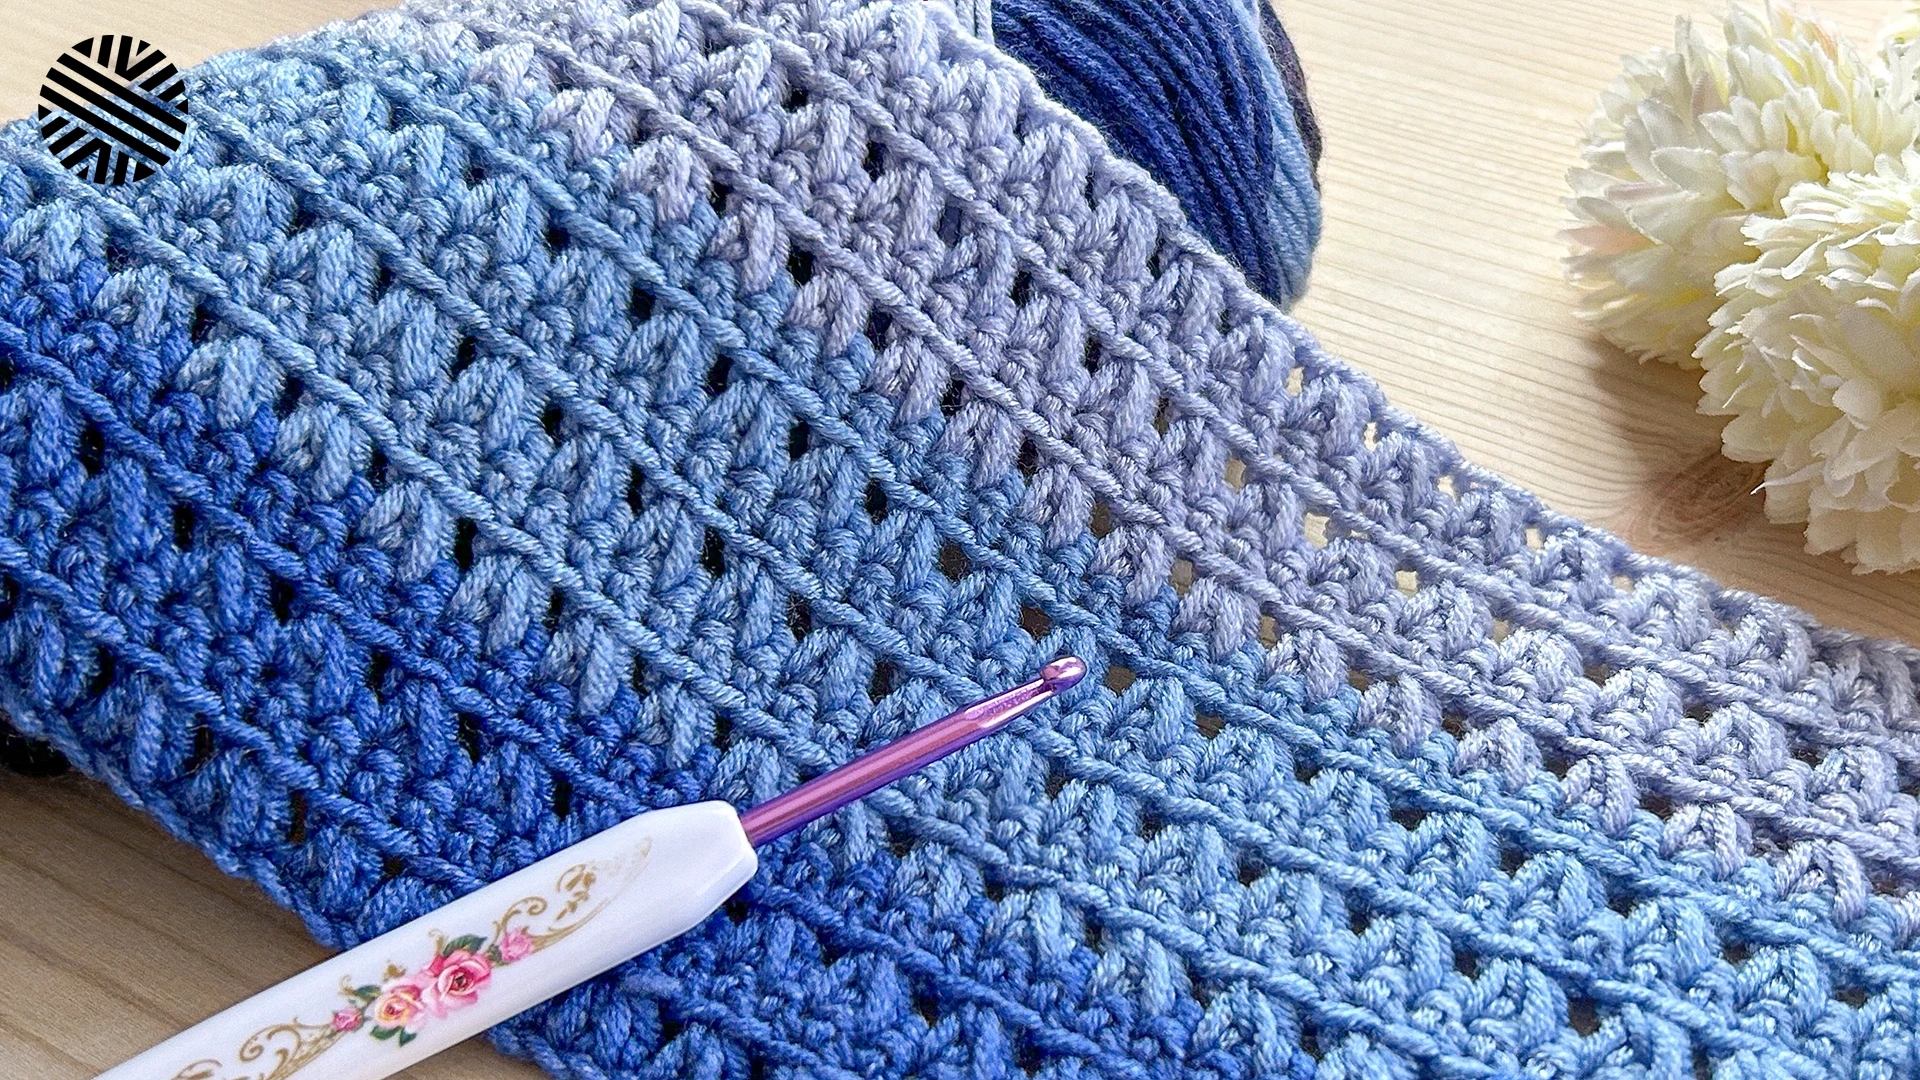 How To Crochet An Easy/Fast Stitch for Beginners / Ideal for